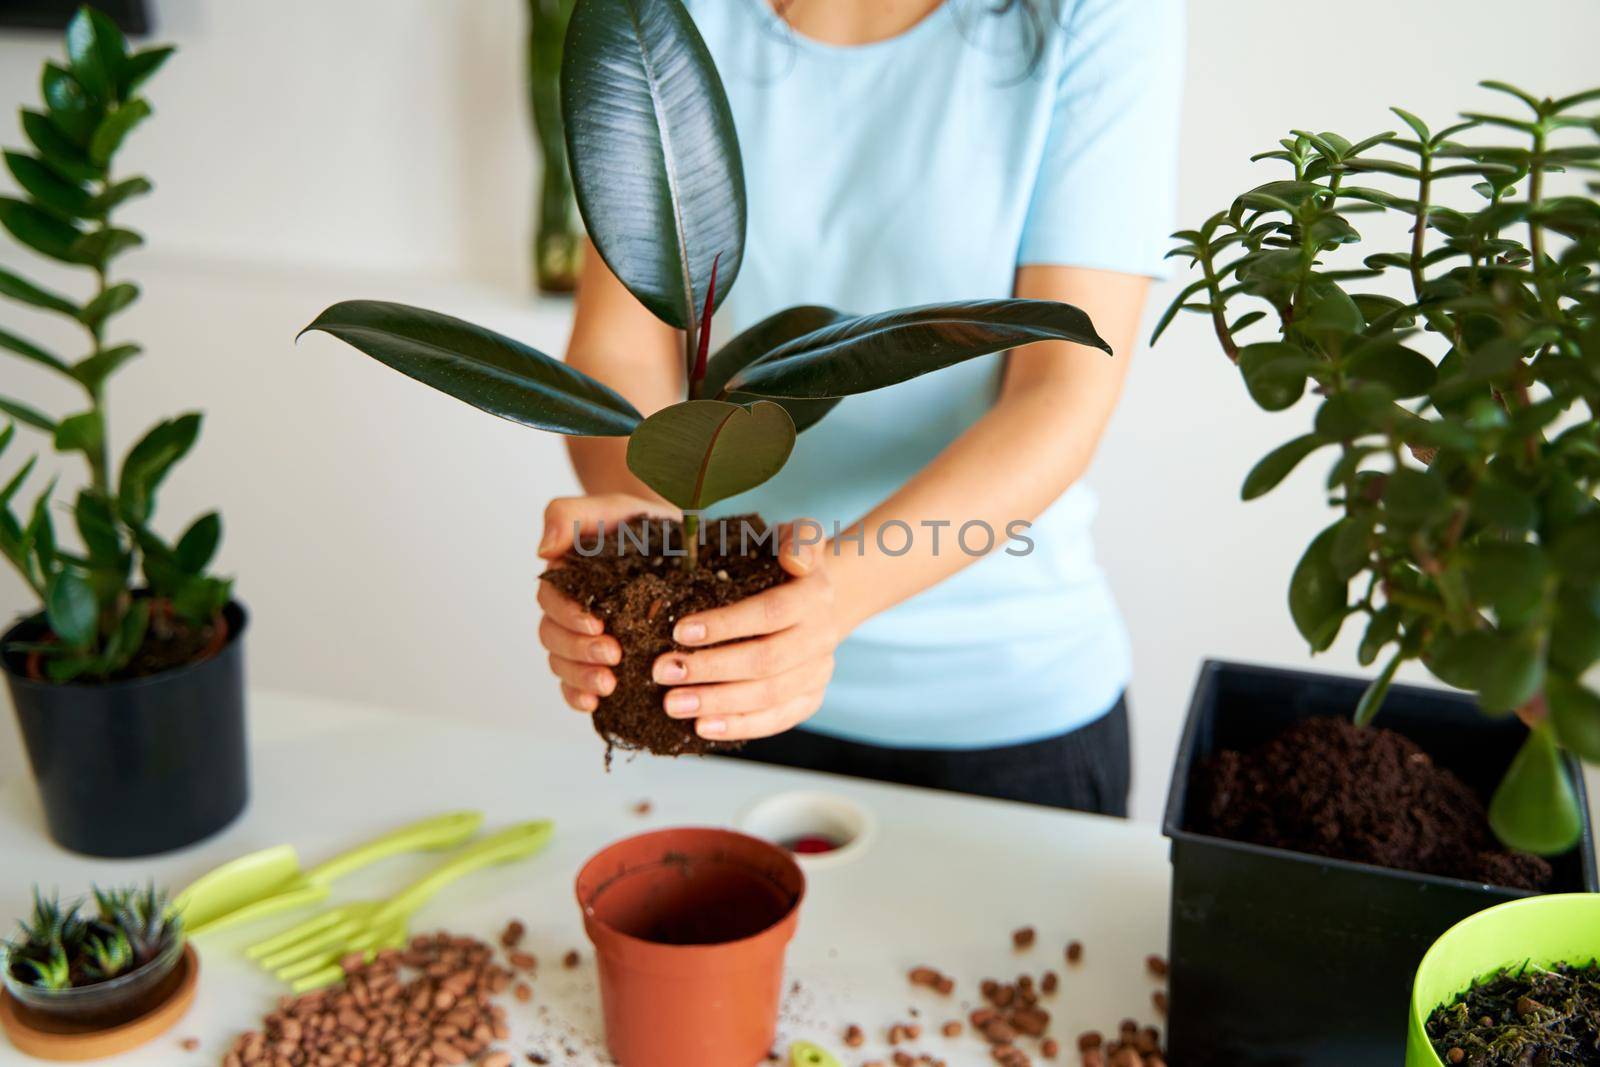 Household chores for transplanting flowers into a new pot. A young girl is engaged in flowers in a bright apartment.